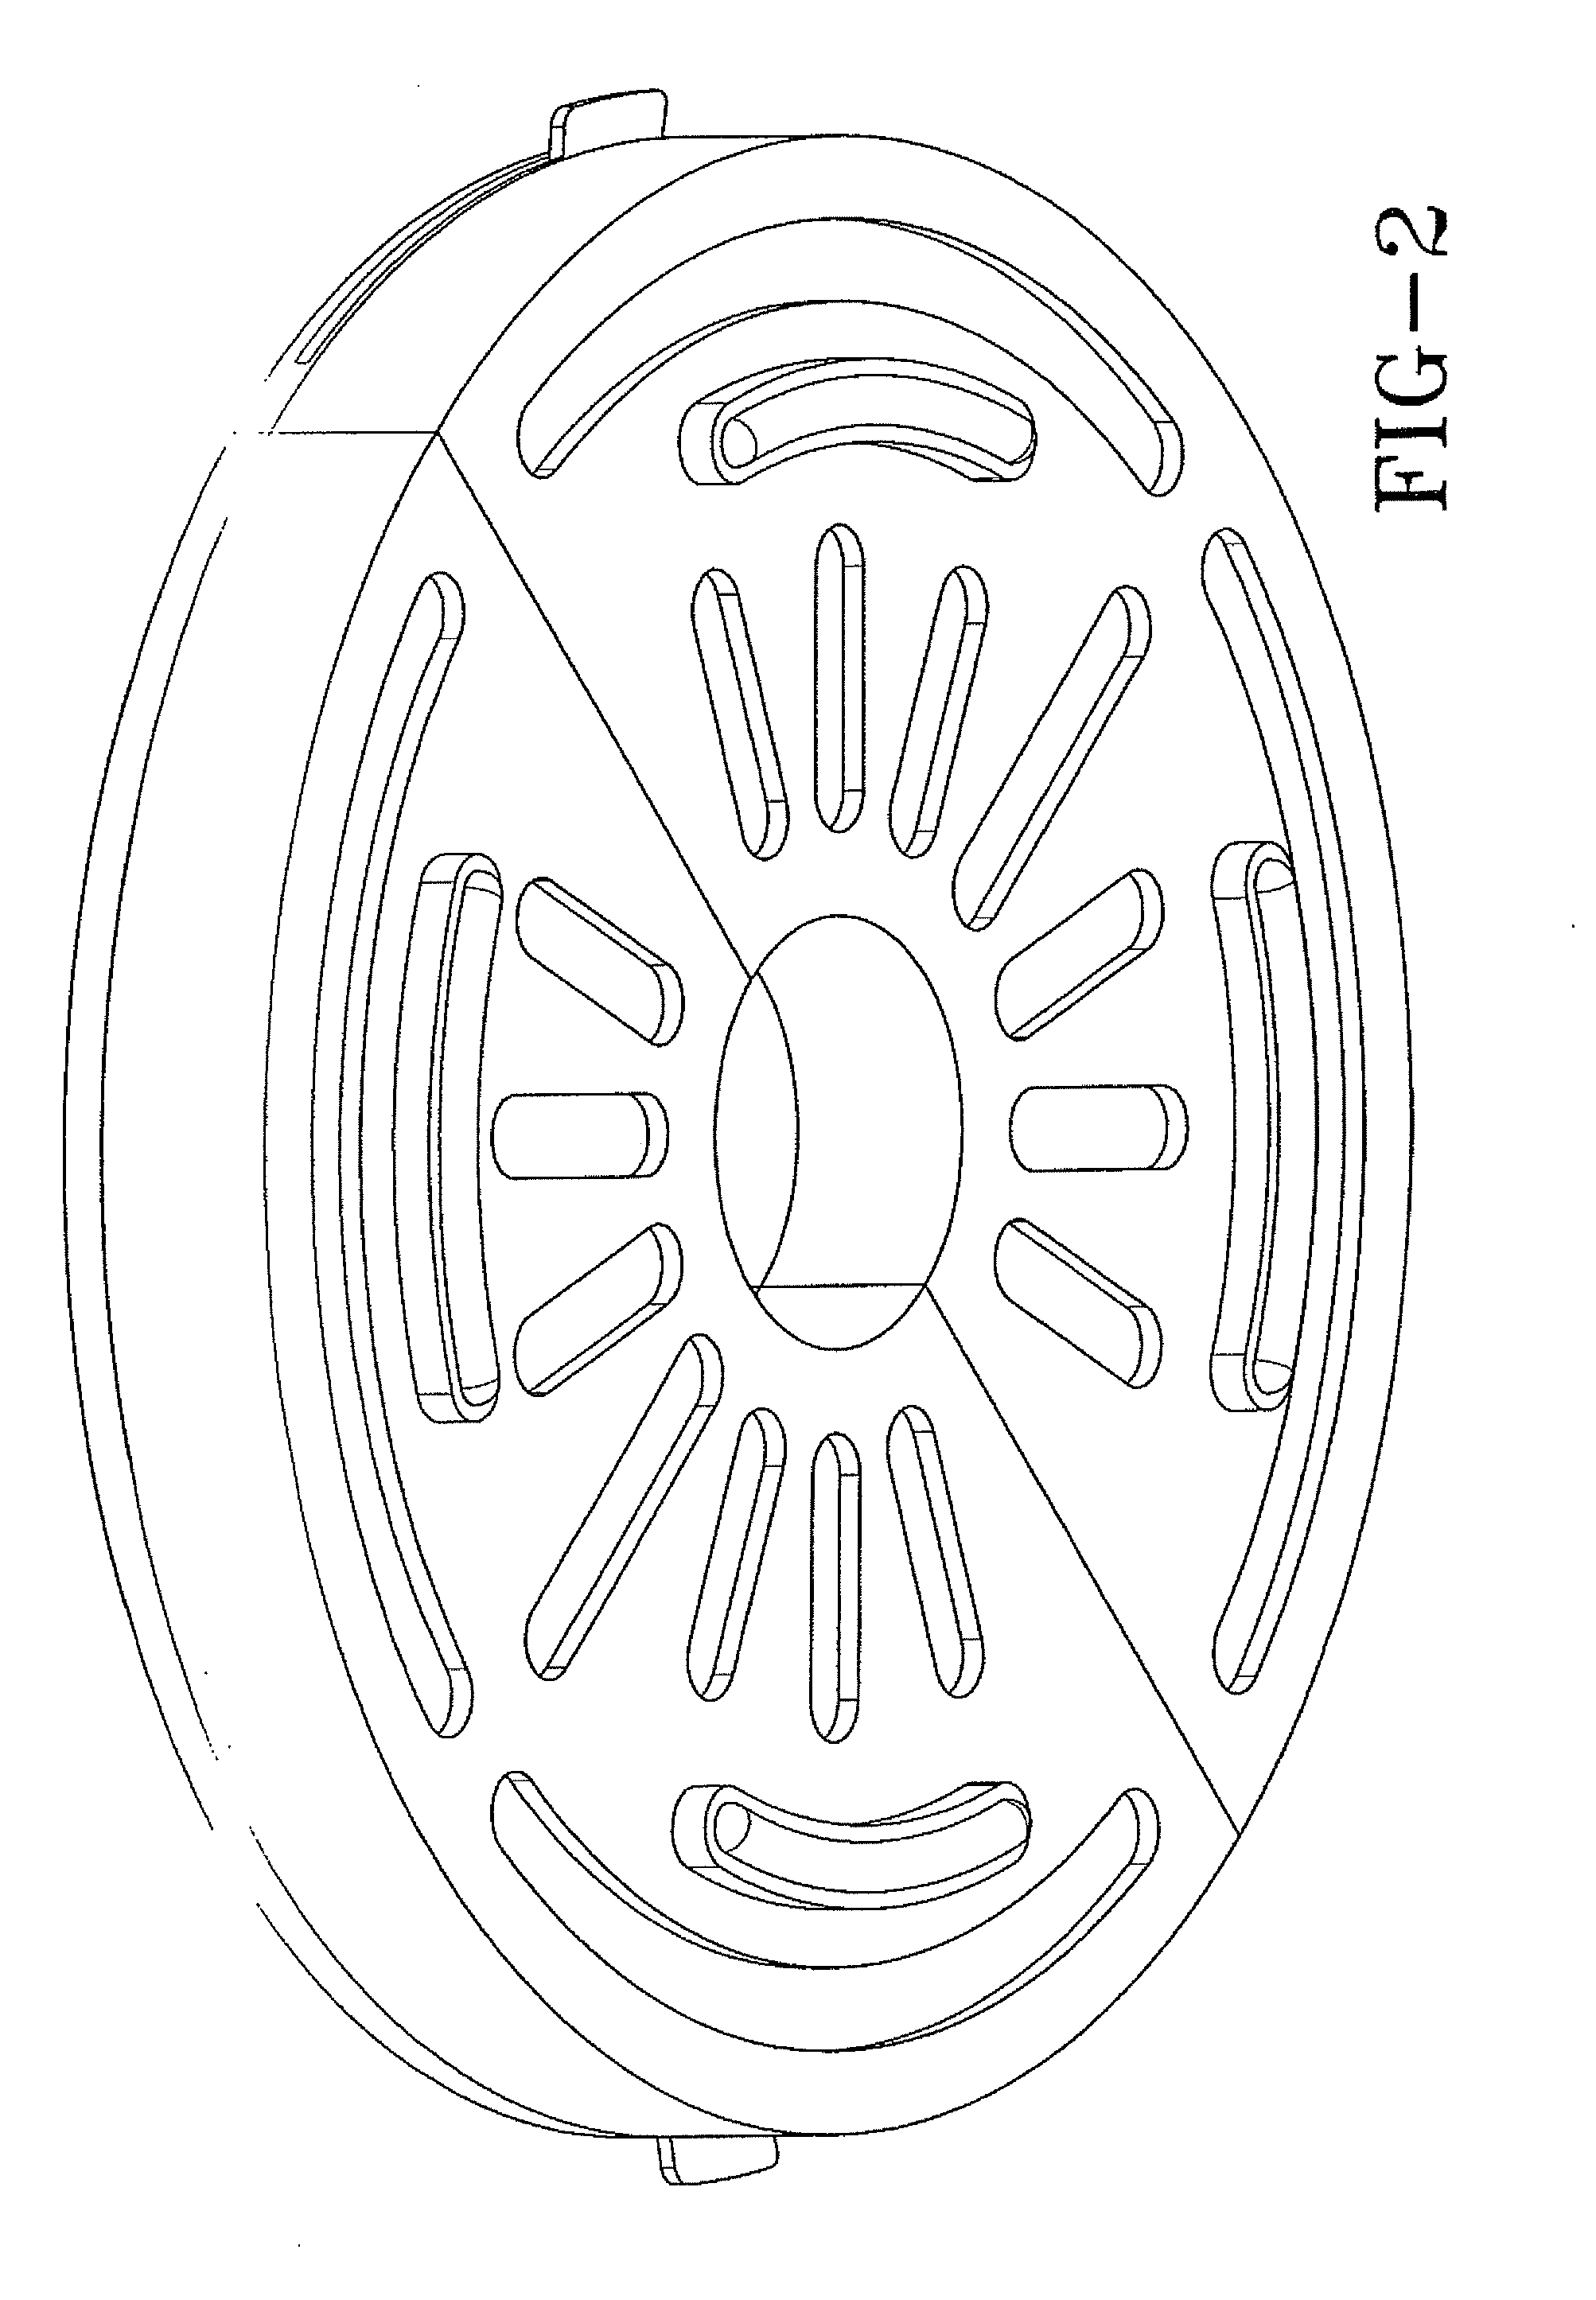 Apparatus for distributing a fragrance using a fan